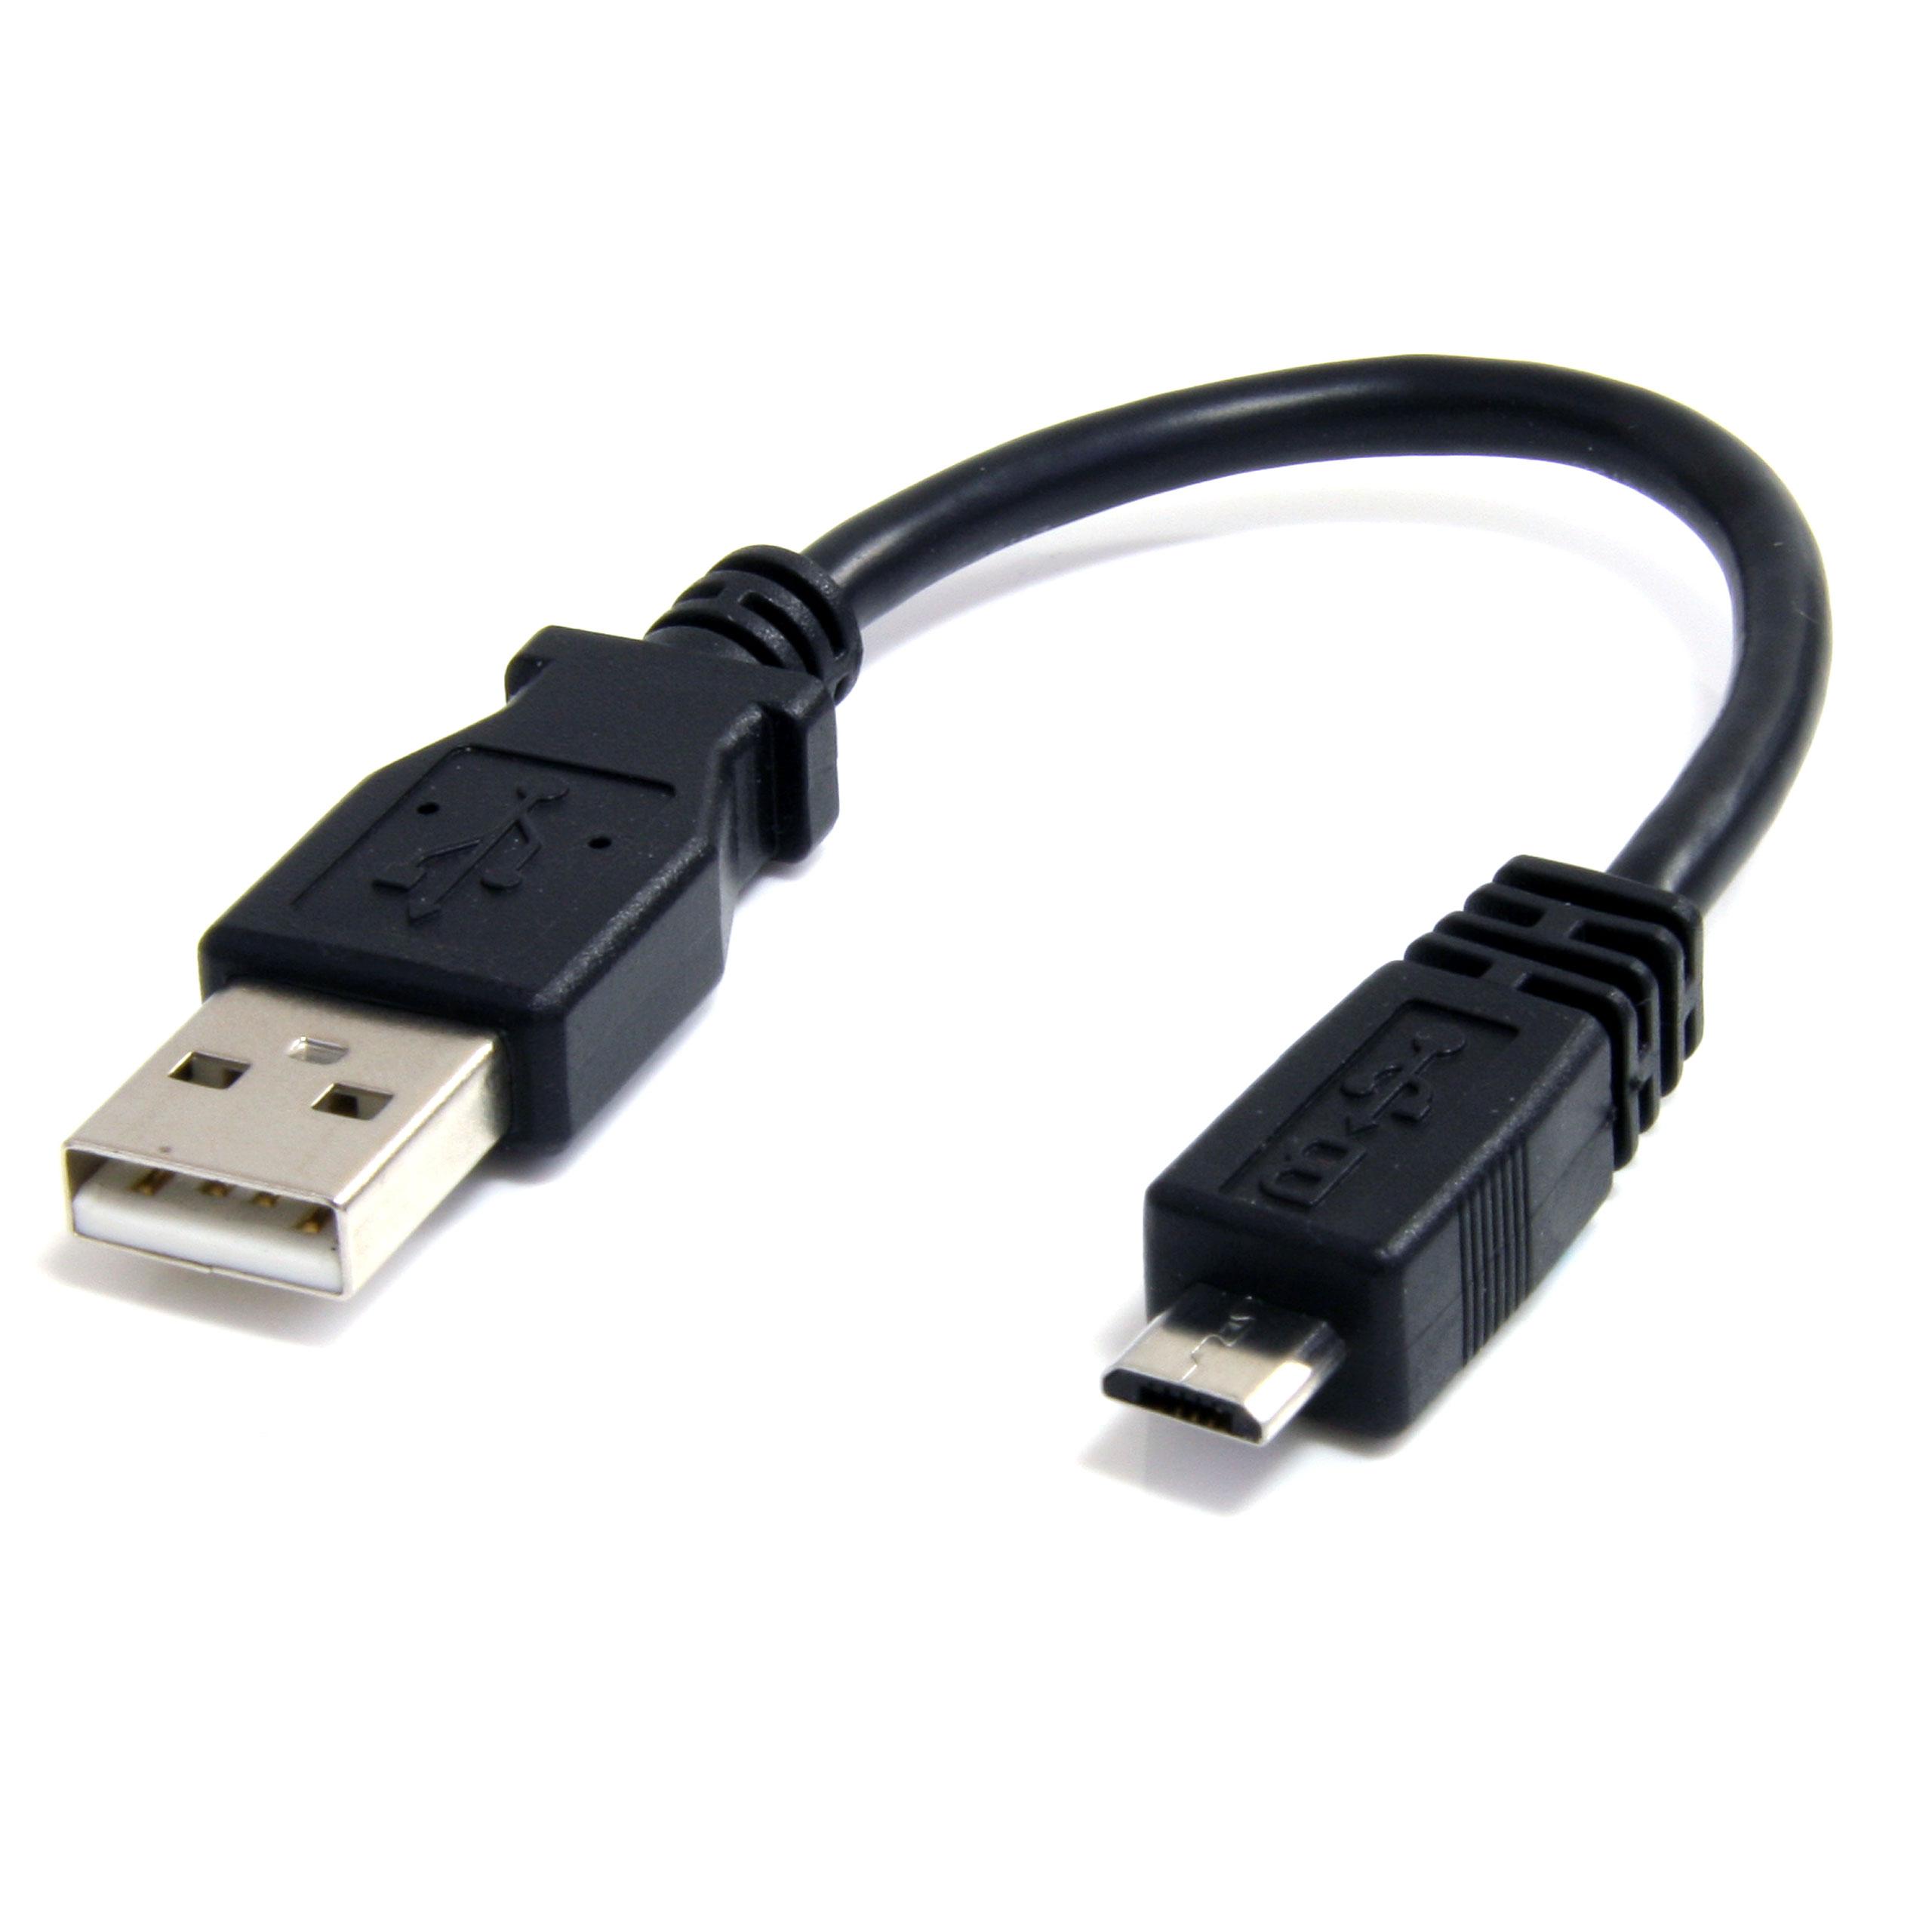 What Is USB Cable?